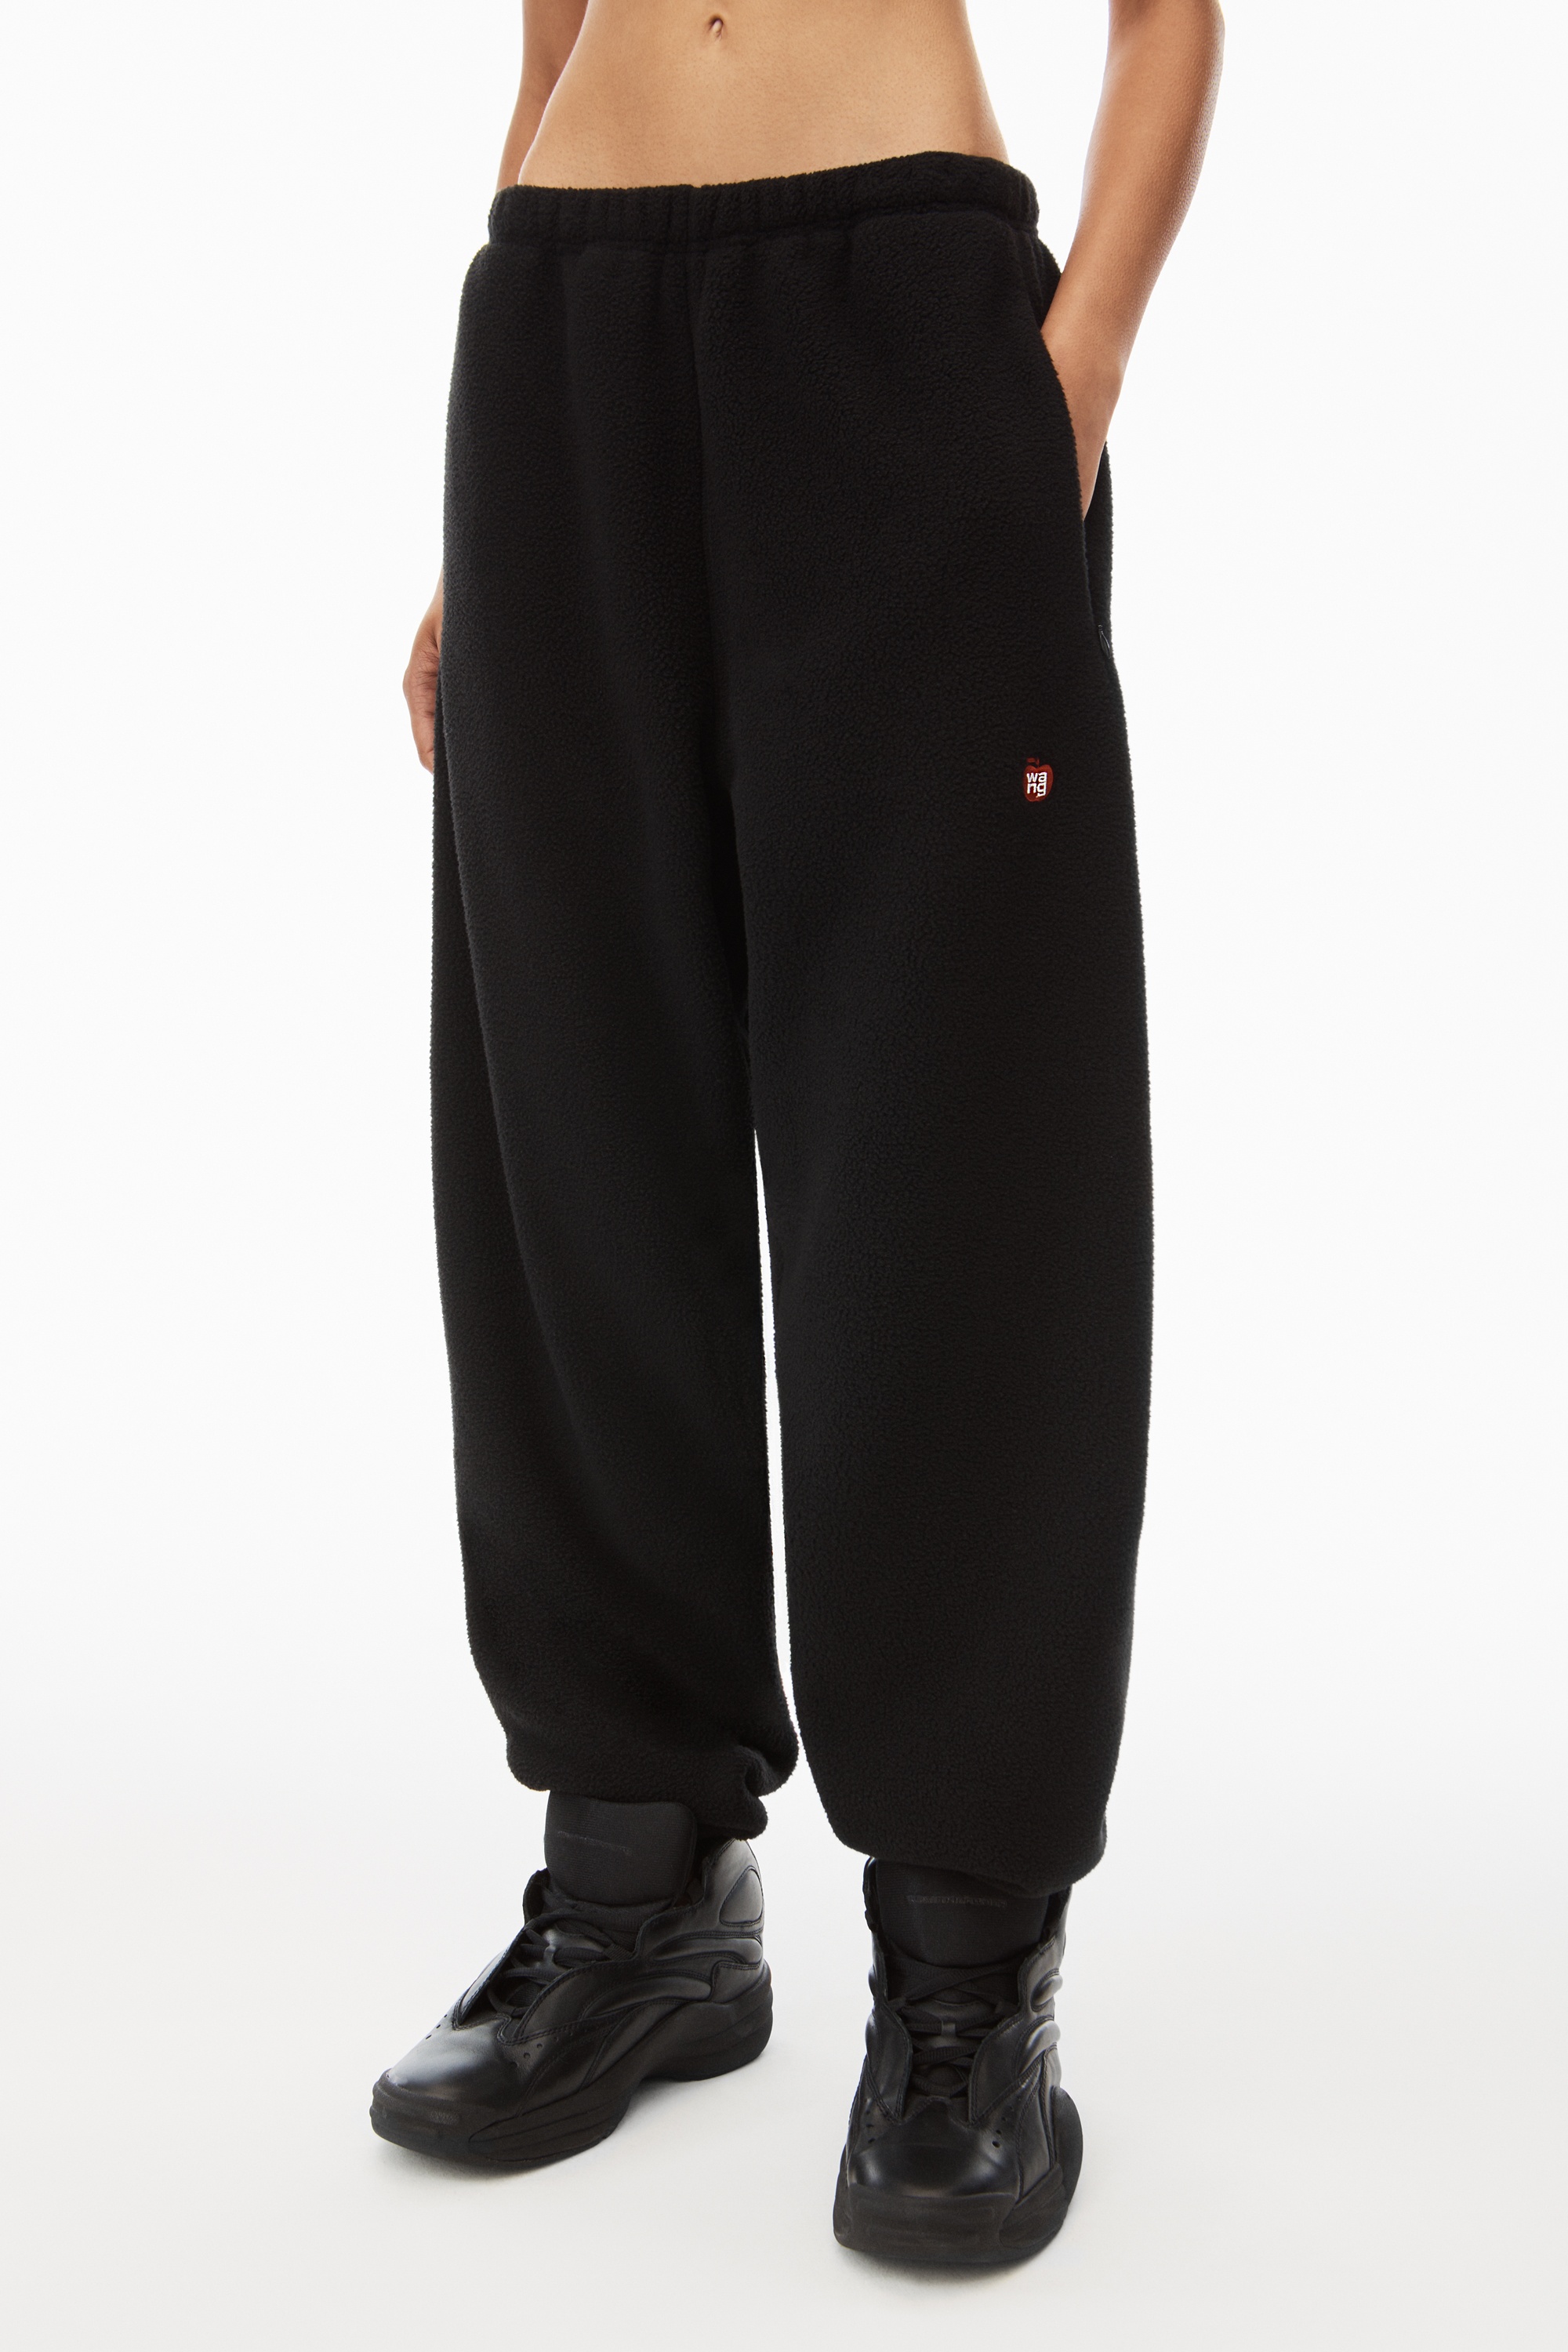 sweatpant in teddy fleece with red apple logo - 3